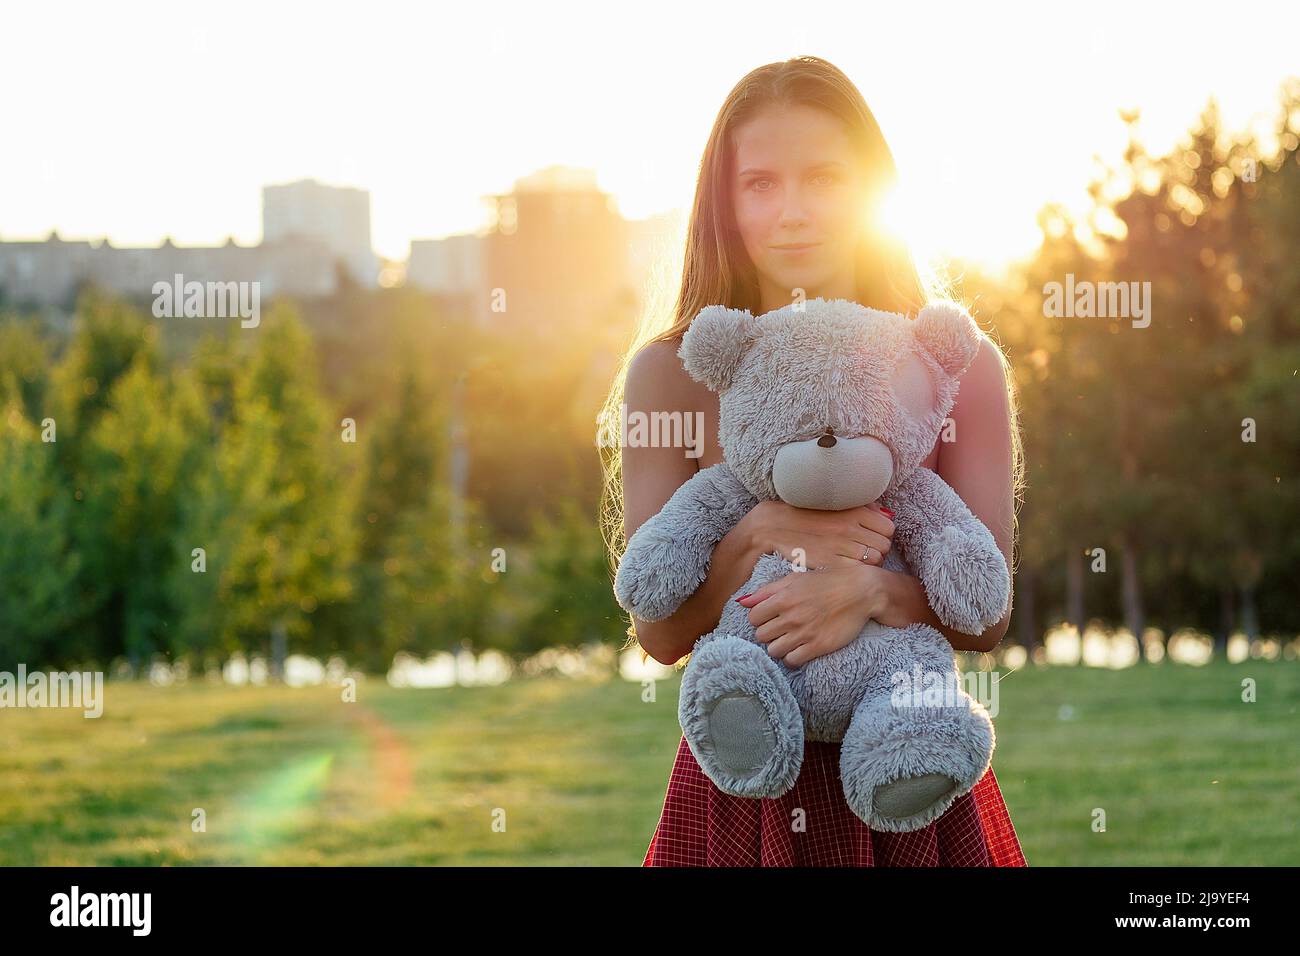 cute long-haired tanned girl enigmatic smile holding a gray teddy bear toy in hands in the park trees background Stock Photo